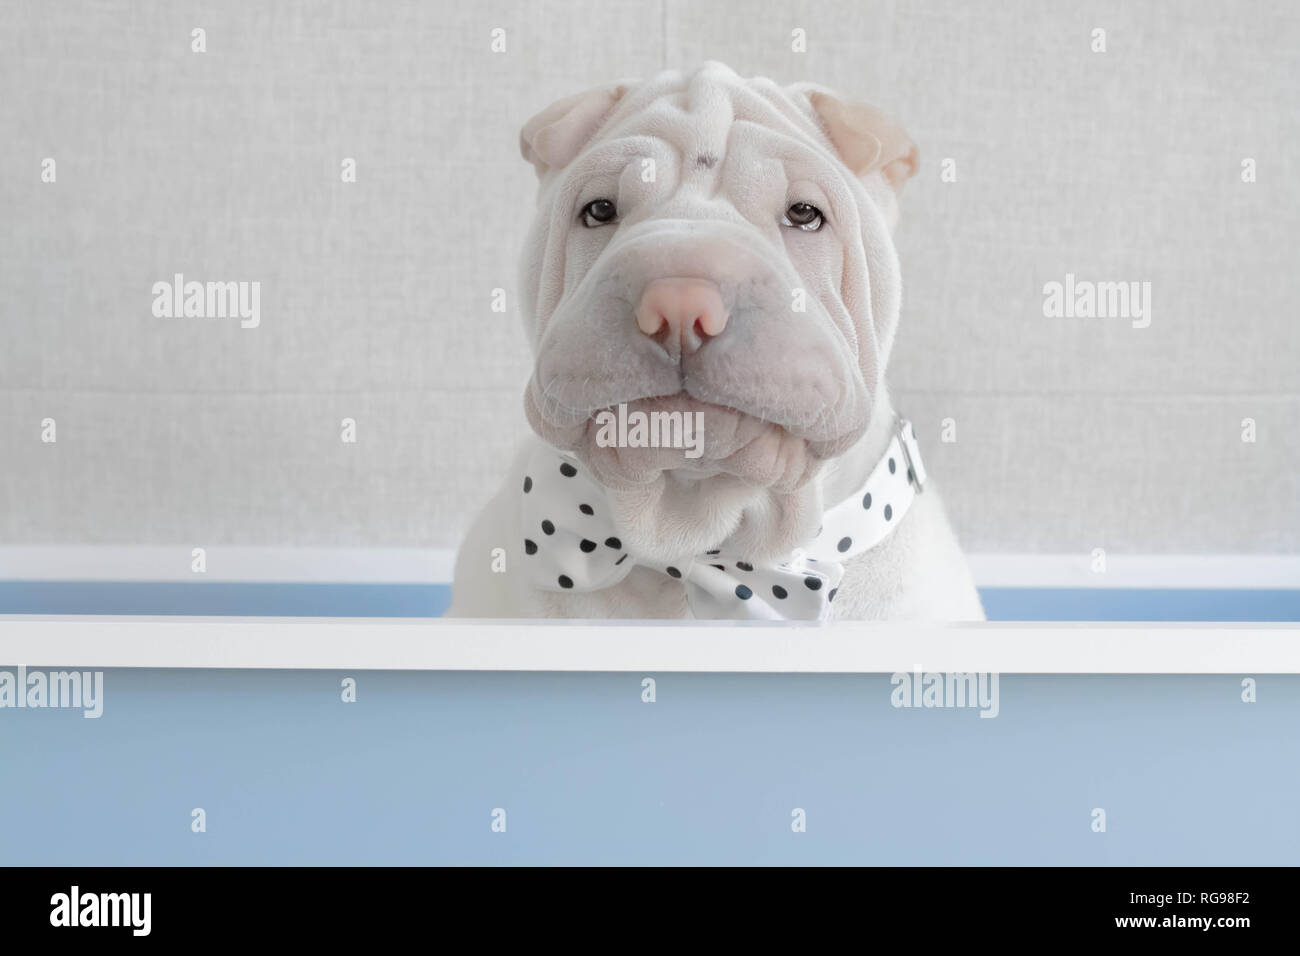 Shar pei puppy dog sitting in a box wearing a bow tie Stock Photo